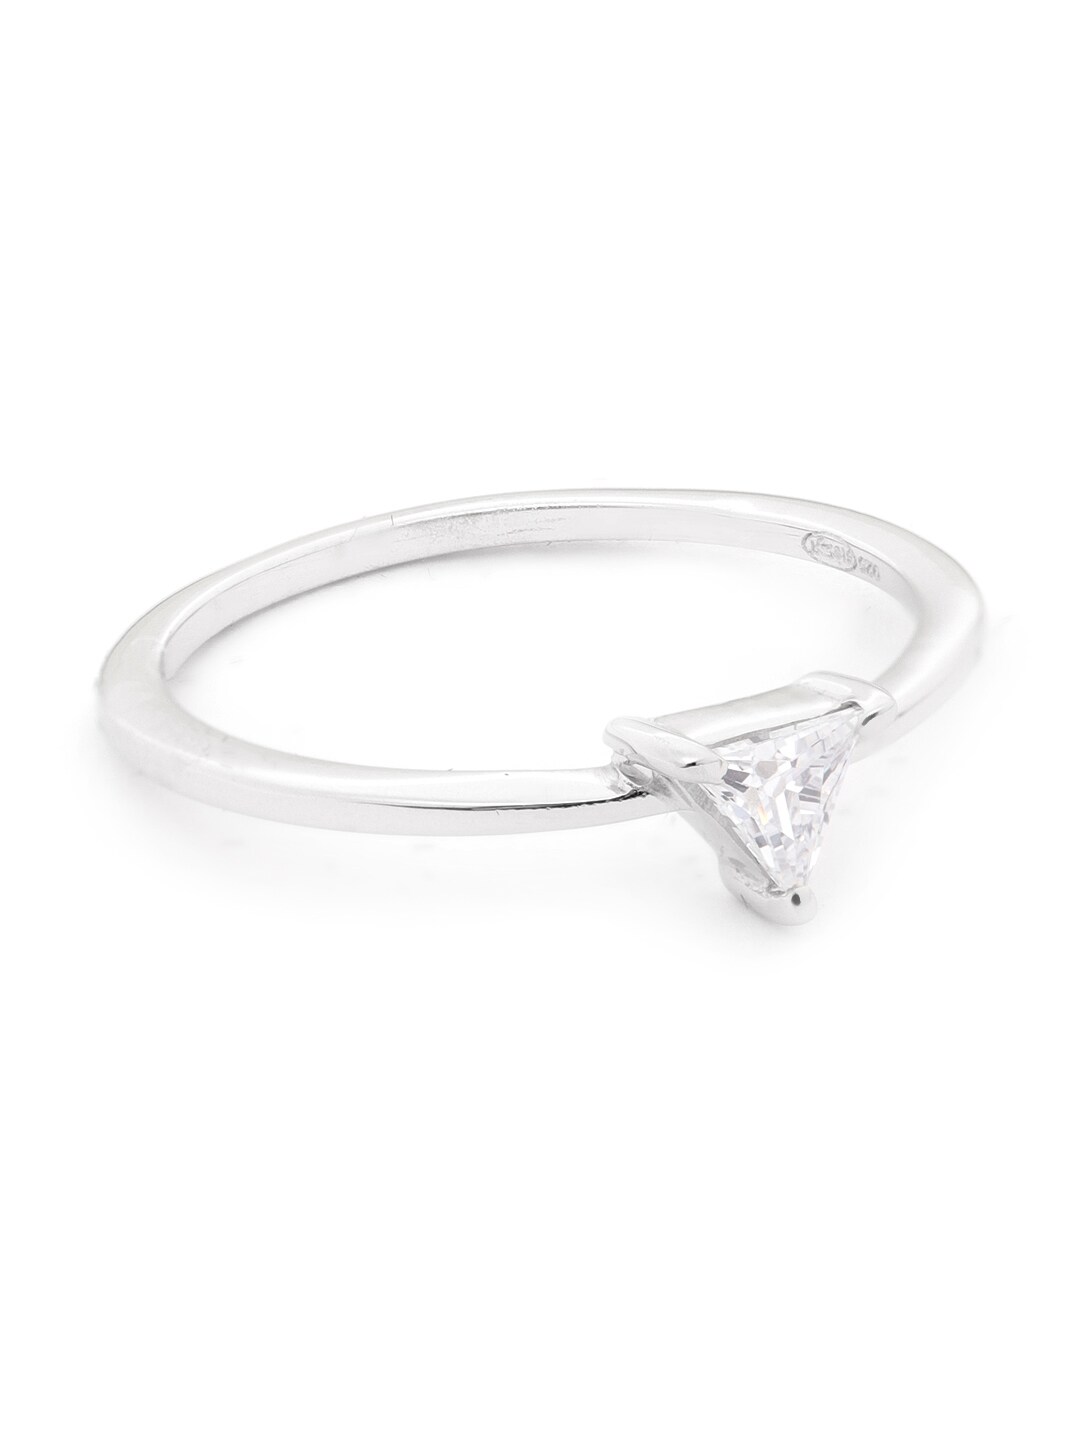 Carlton London 925 Sterling Silver-Women Rhodium-Plated CZ Stone Studded Finger Ring Price in India